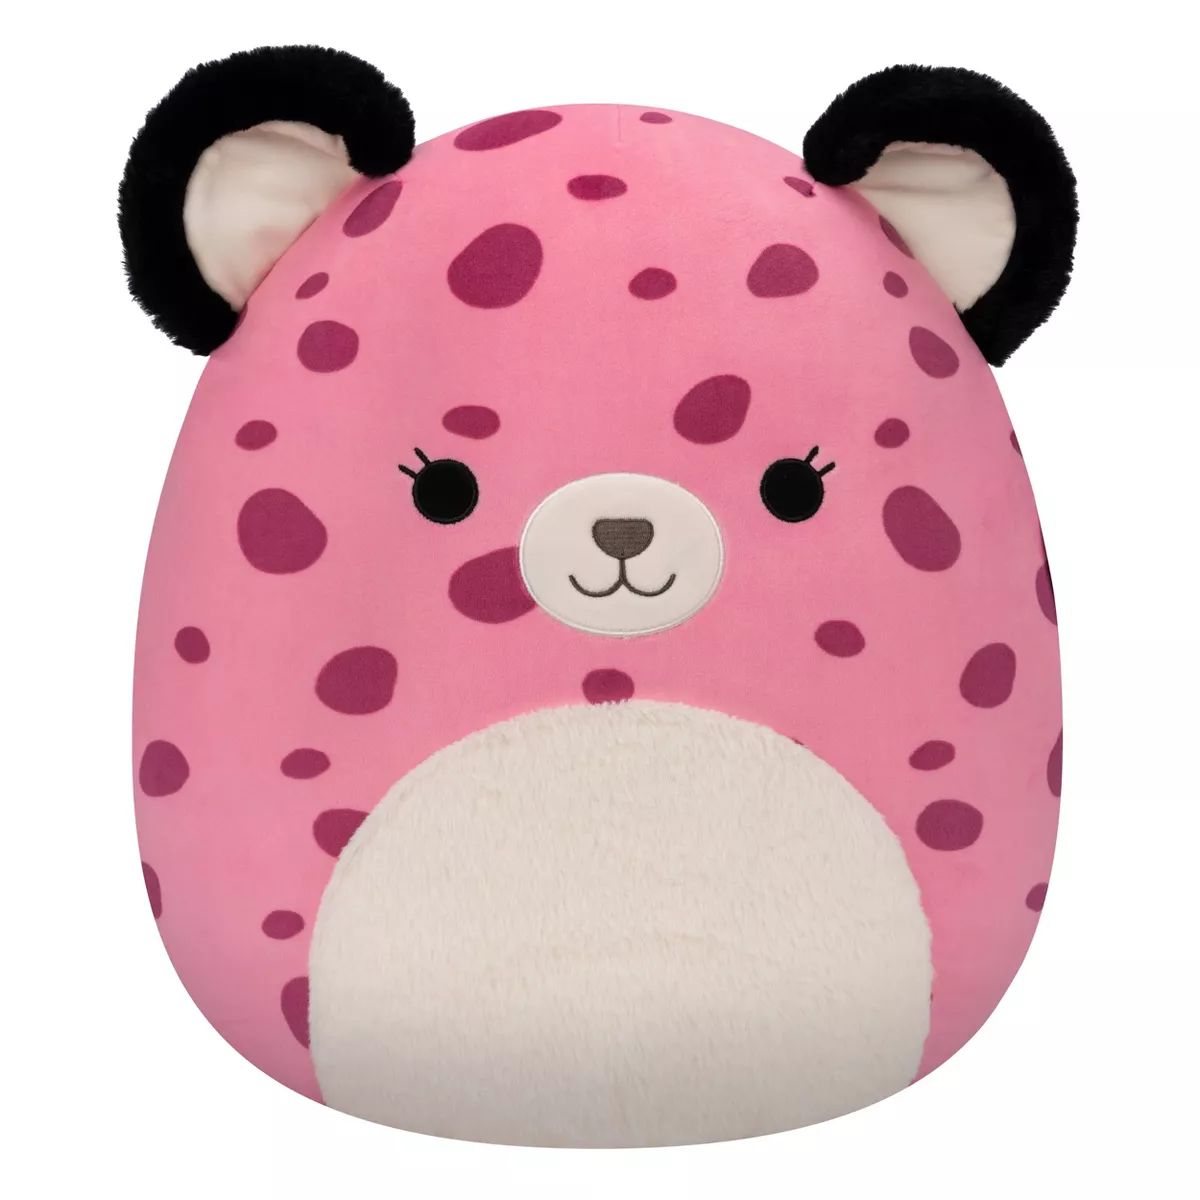 Squishmallows 16" Jalisca the Pink Leopard with Fuzzy Belly Plush Toy | Target